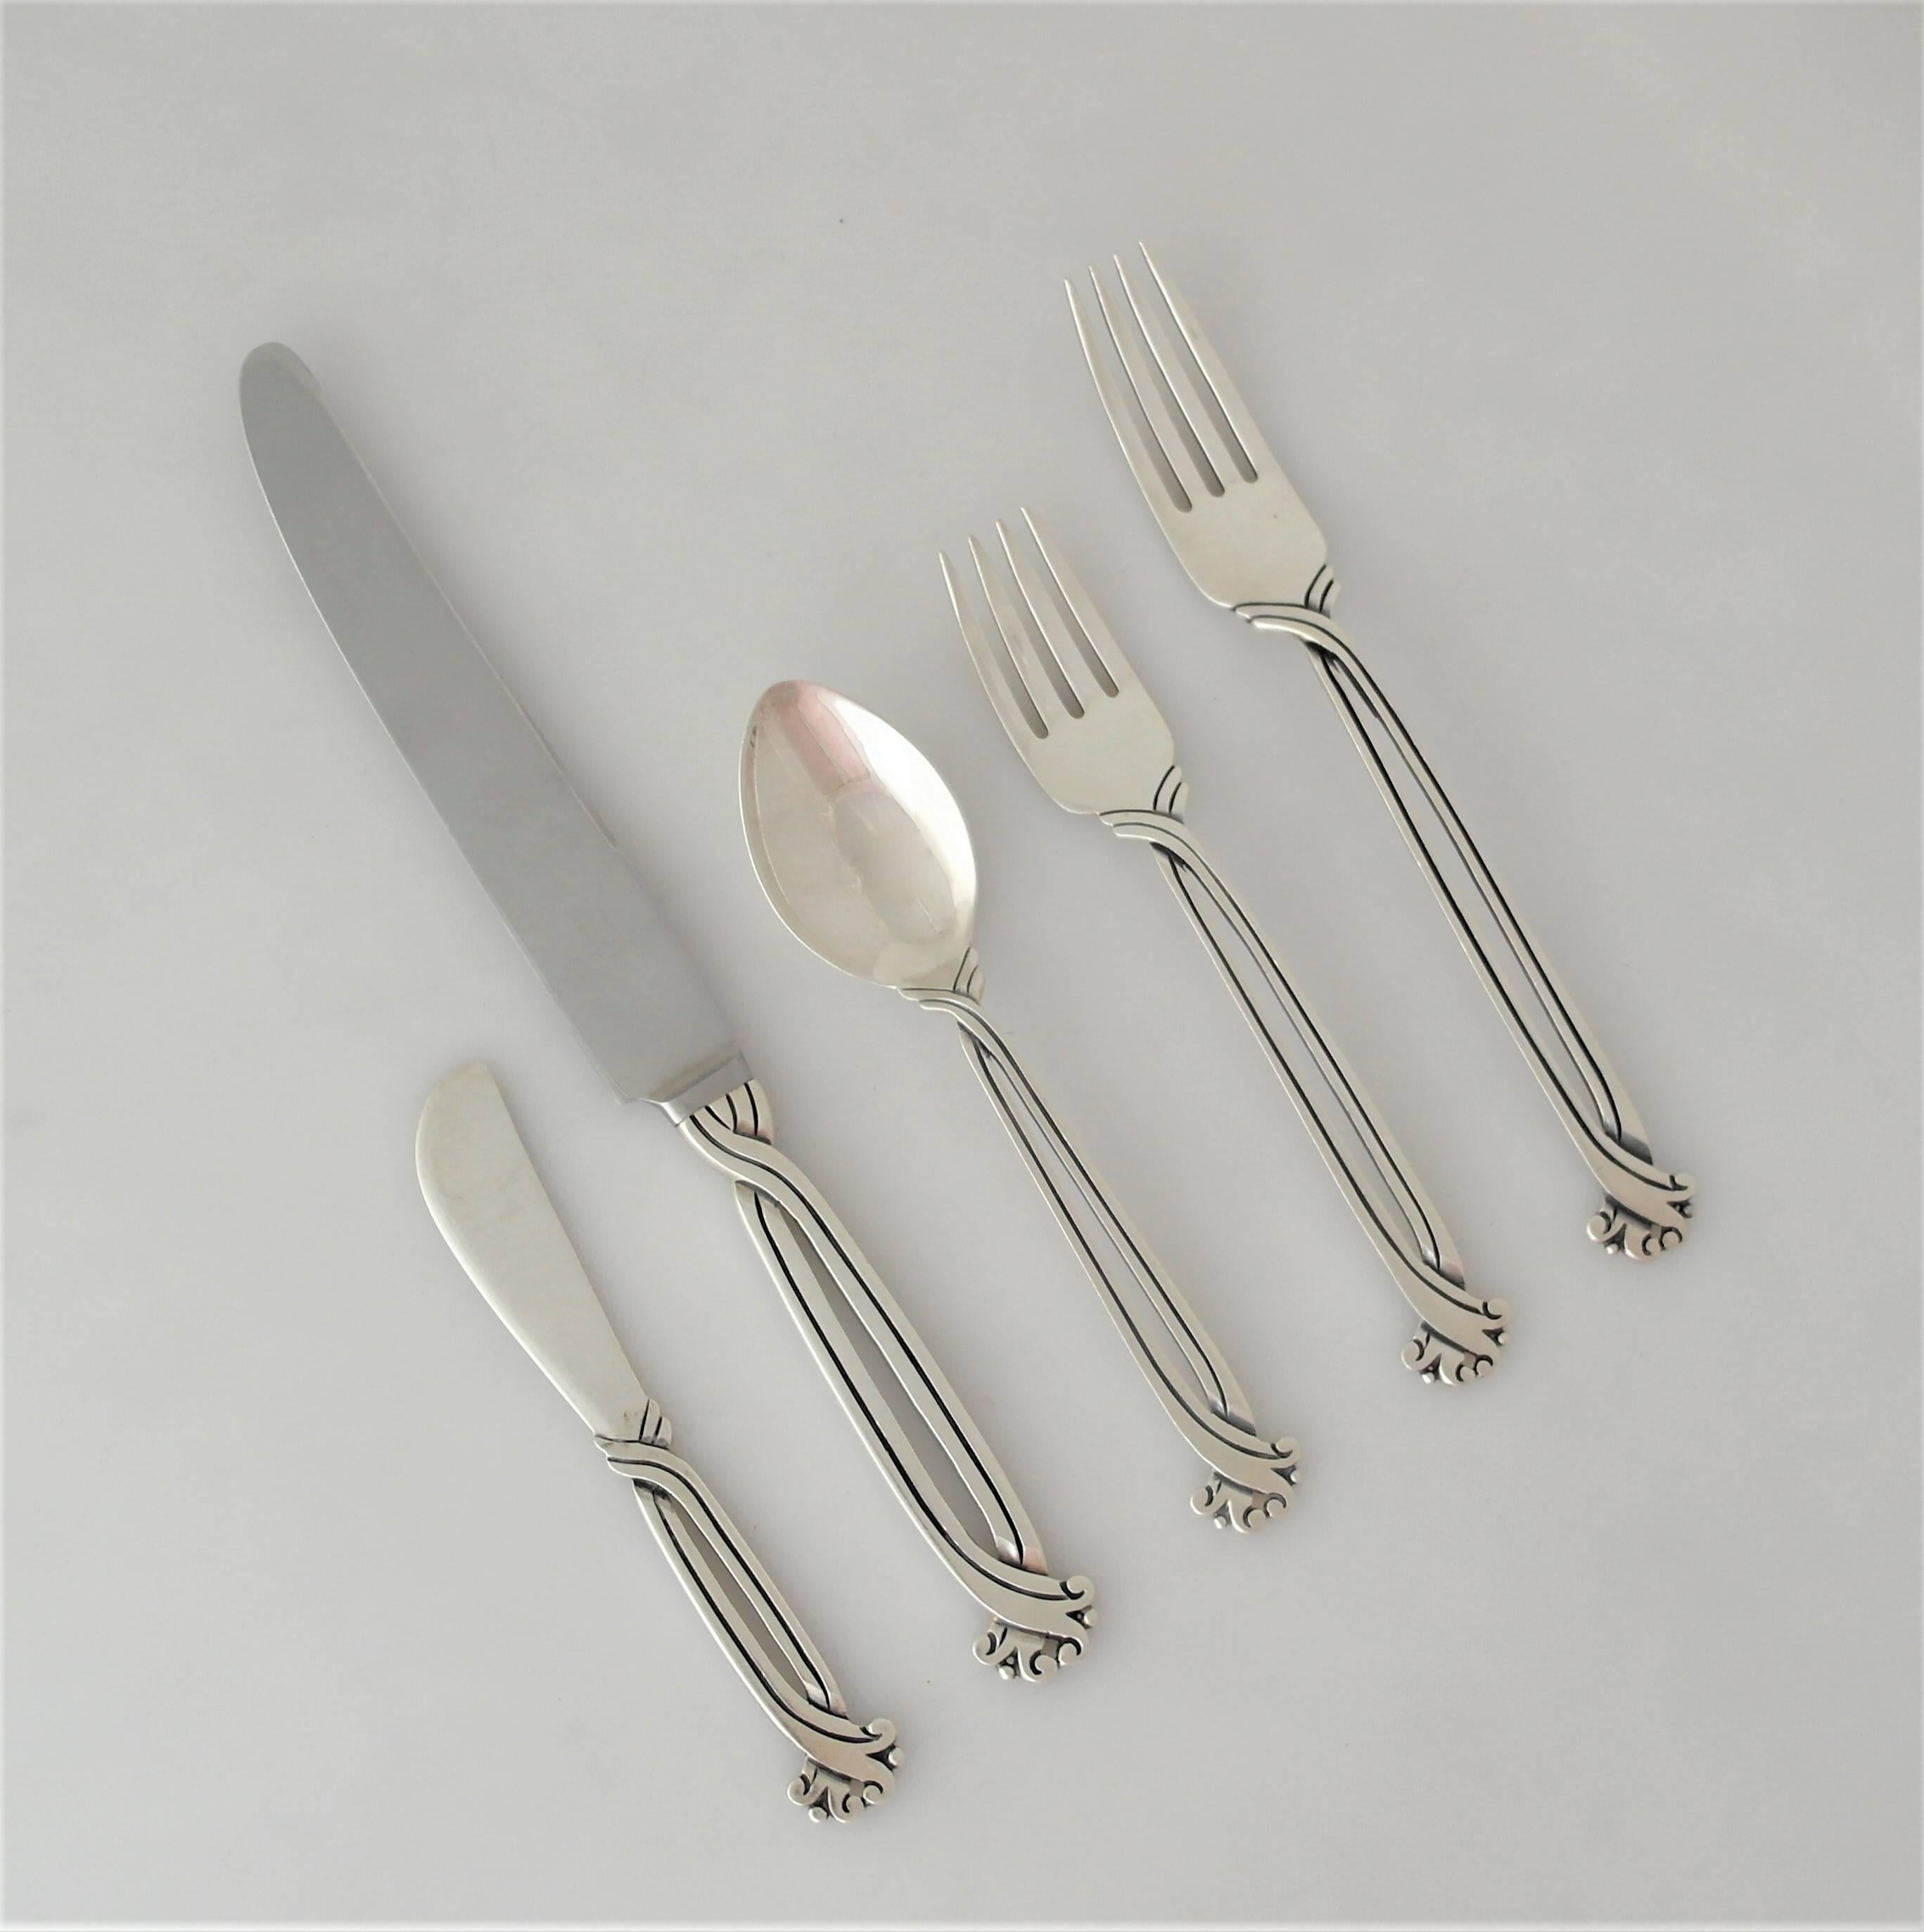 Being offered is a flatware set made by Pedro Castillo of Taxco, Mexico. Castillo, a former silversmith for William Spratling and Hector Aguilar, opened his own shop in the late 1940s. 
This sterling silver set, resembling the Aztec design, consists